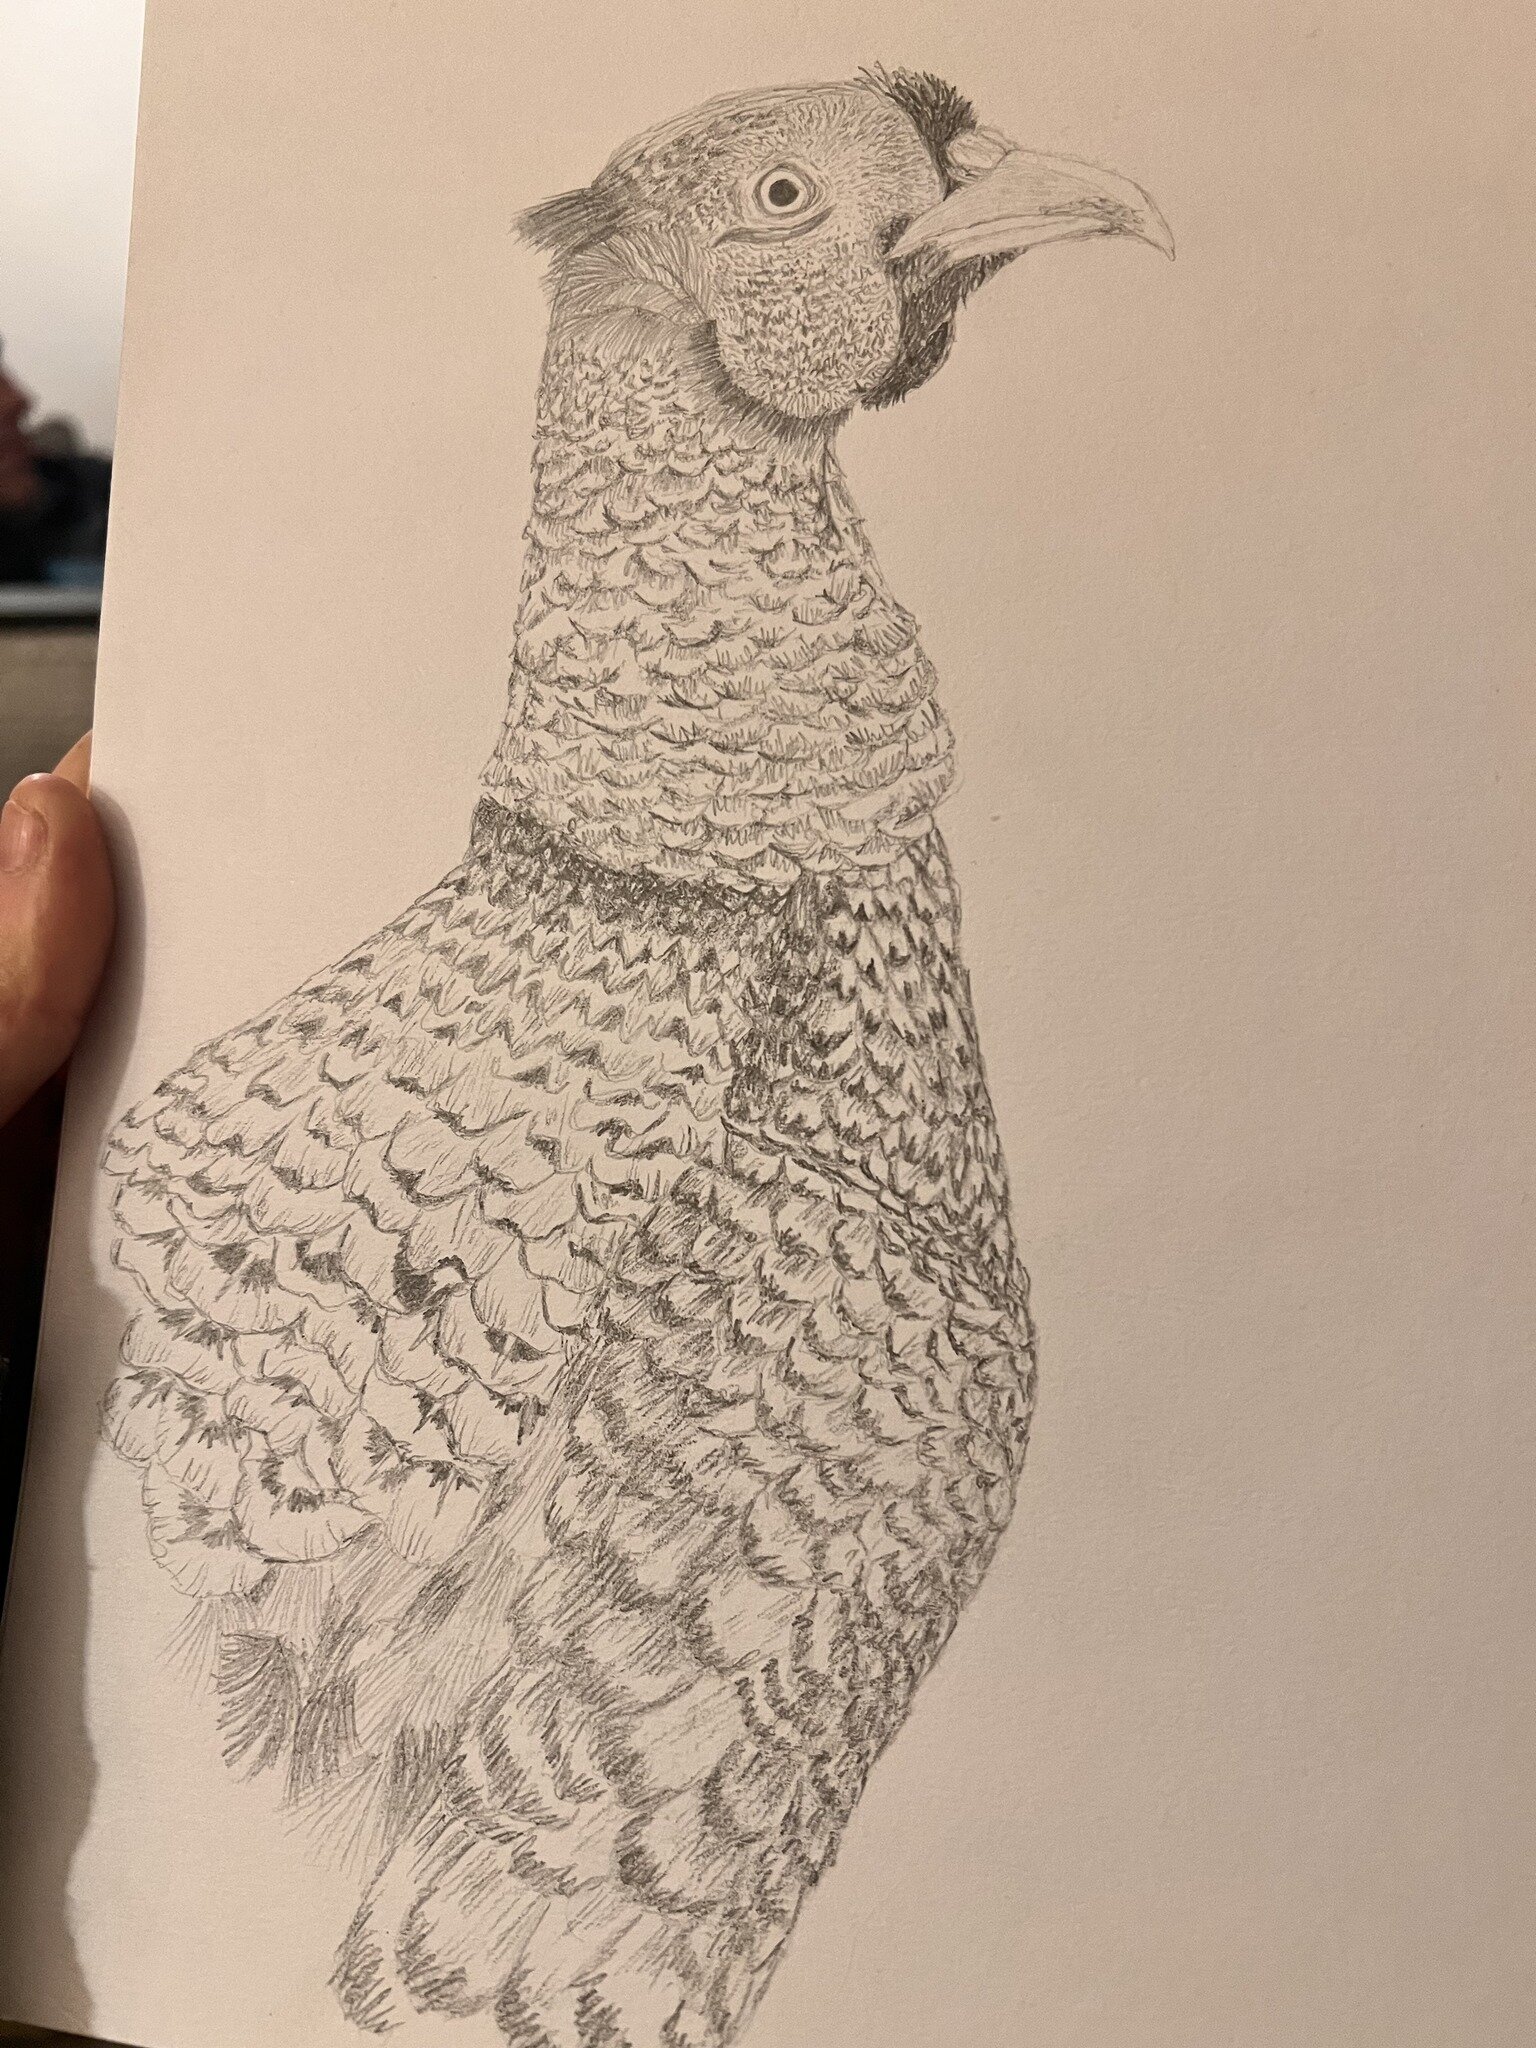 I NEED YOUR HELP!

After finishing my latest pheasant I'm not sure what to do with him. So I'm after your vital and precious opinions.

Here are the options - do I:
1. Leave him as he is
2. Add some paint and colour
3. Add some black ink

Leave your 